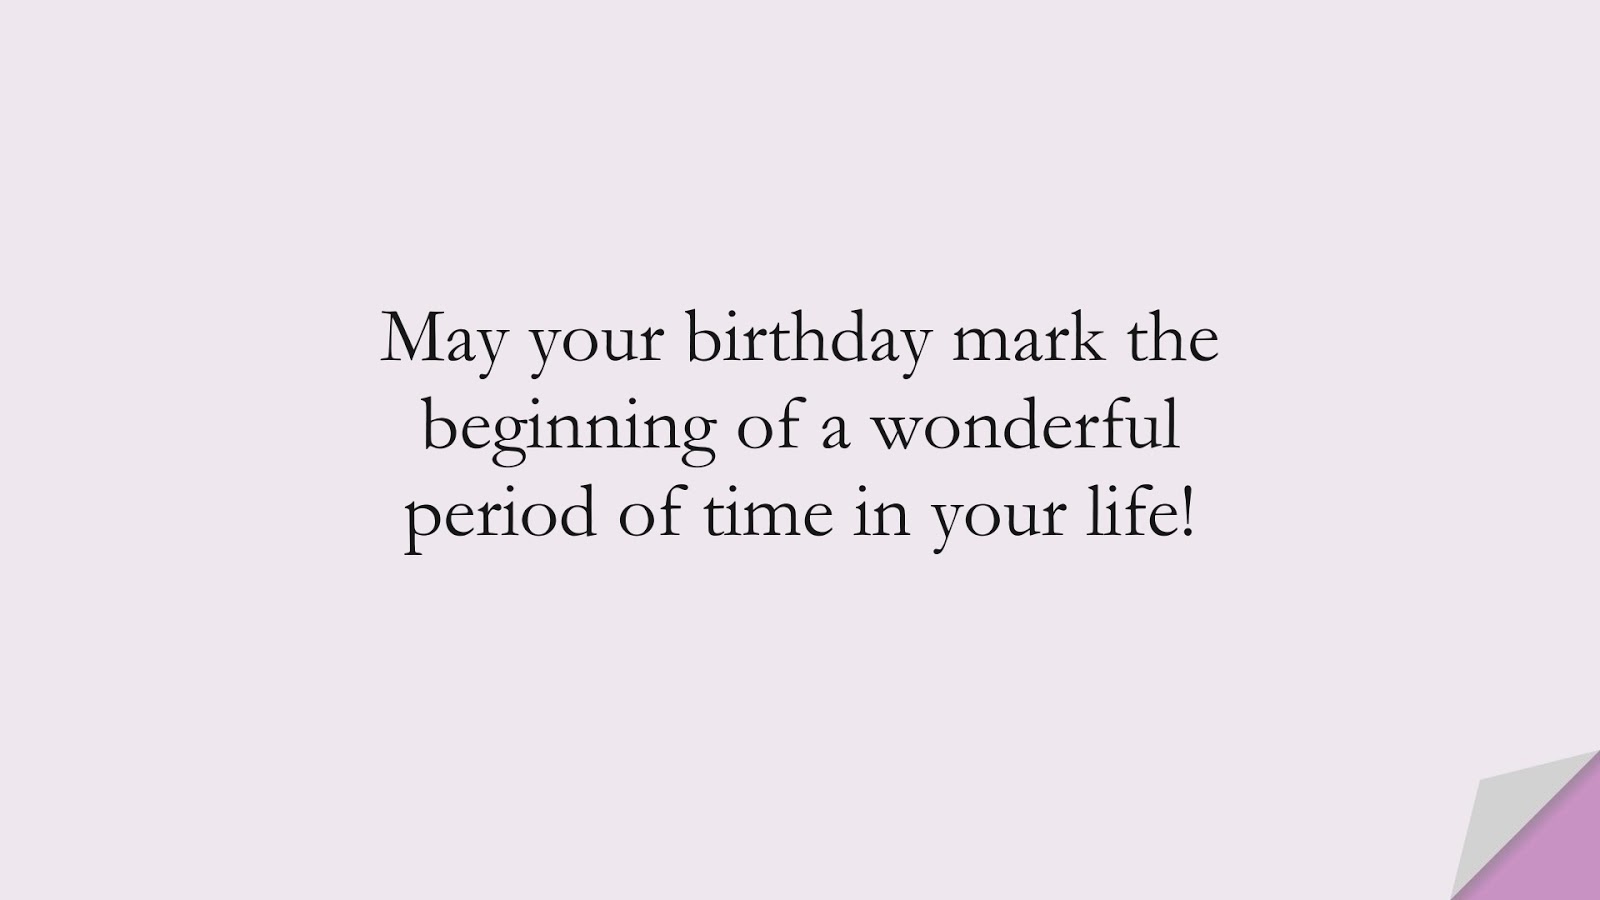 May your birthday mark the beginning of a wonderful period of time in your life!FALSE